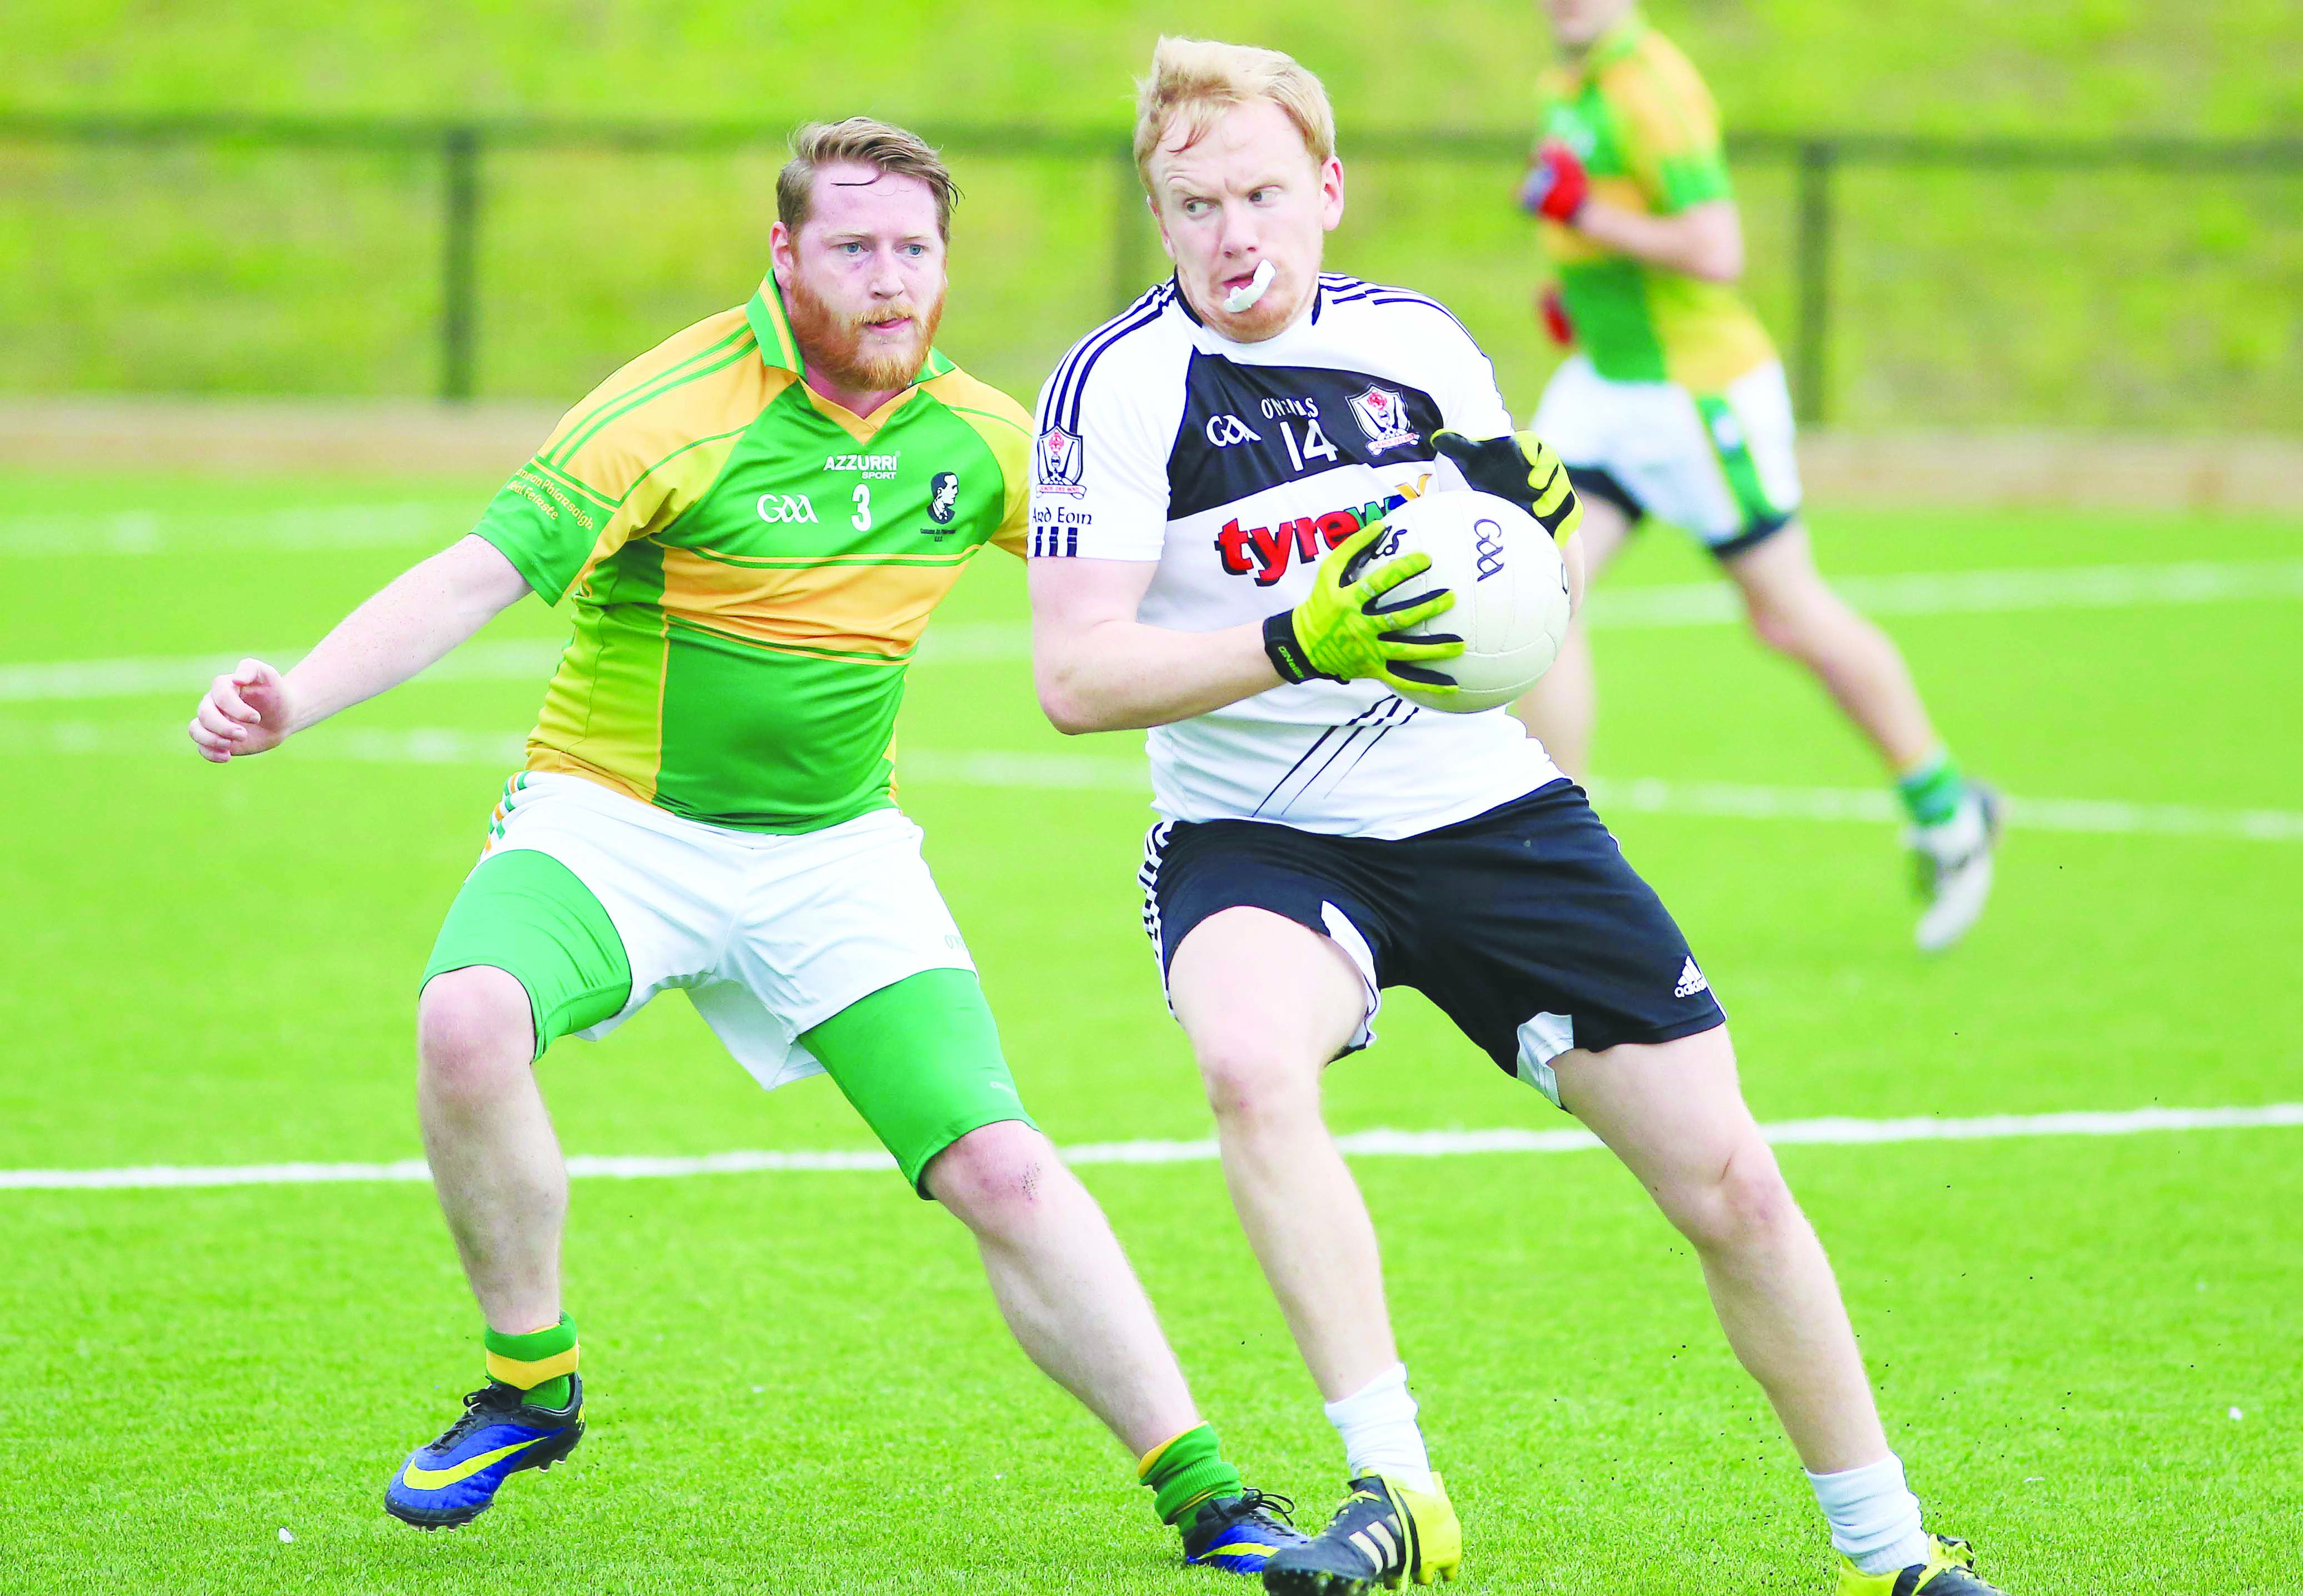 Ardoyne full-forward Ciaran McNeill claims possession ahead of Pearse\'s full-back Tomas O\'Neill during the JFC clash between the sides last Sunday. The Kickhams are back in action this week when they take on Mitchel\'s for a place in the last four